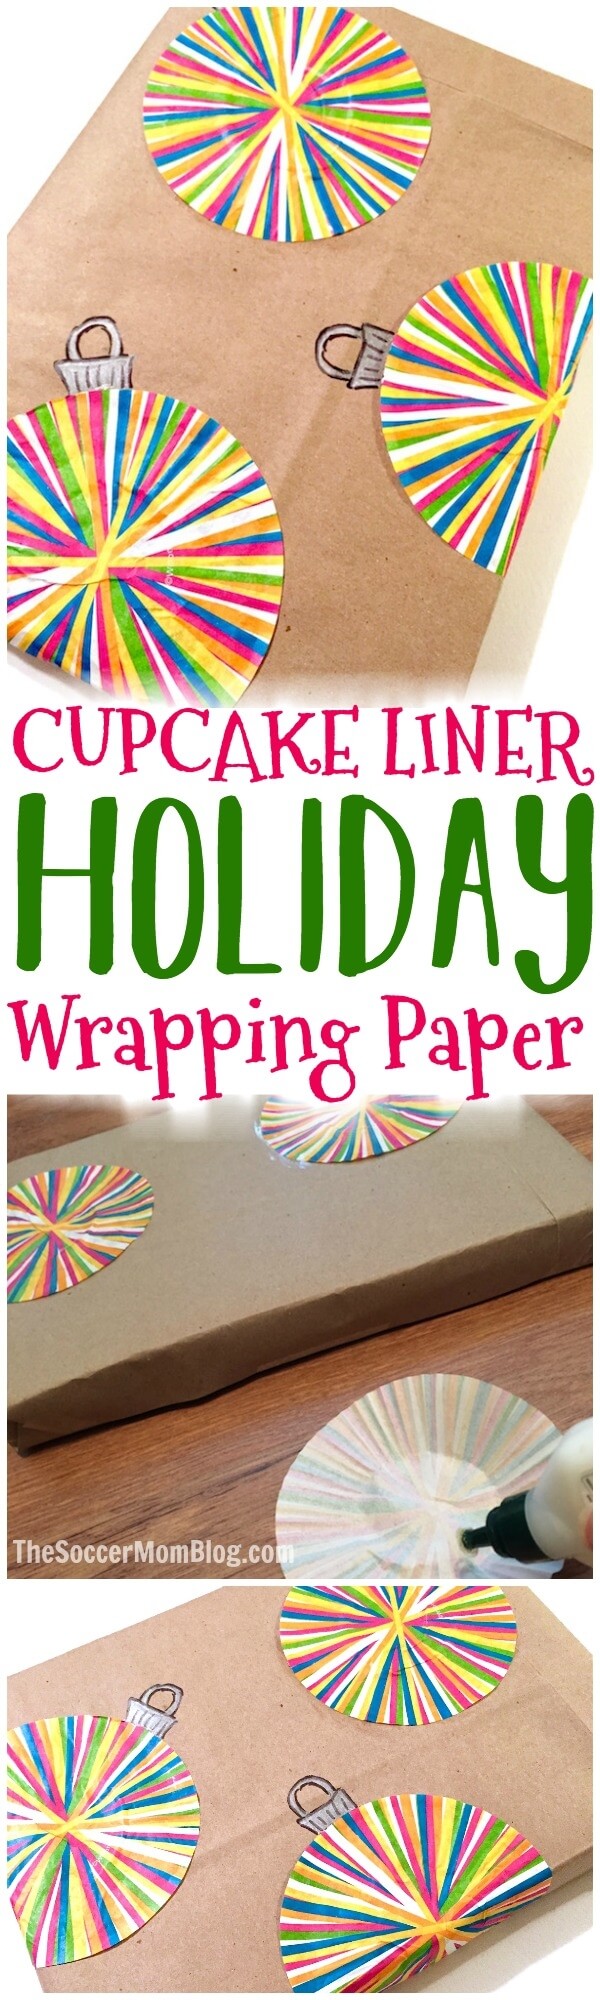 Easy homemade Christmas wrapping paper made with cupcake liners and recycled materials.